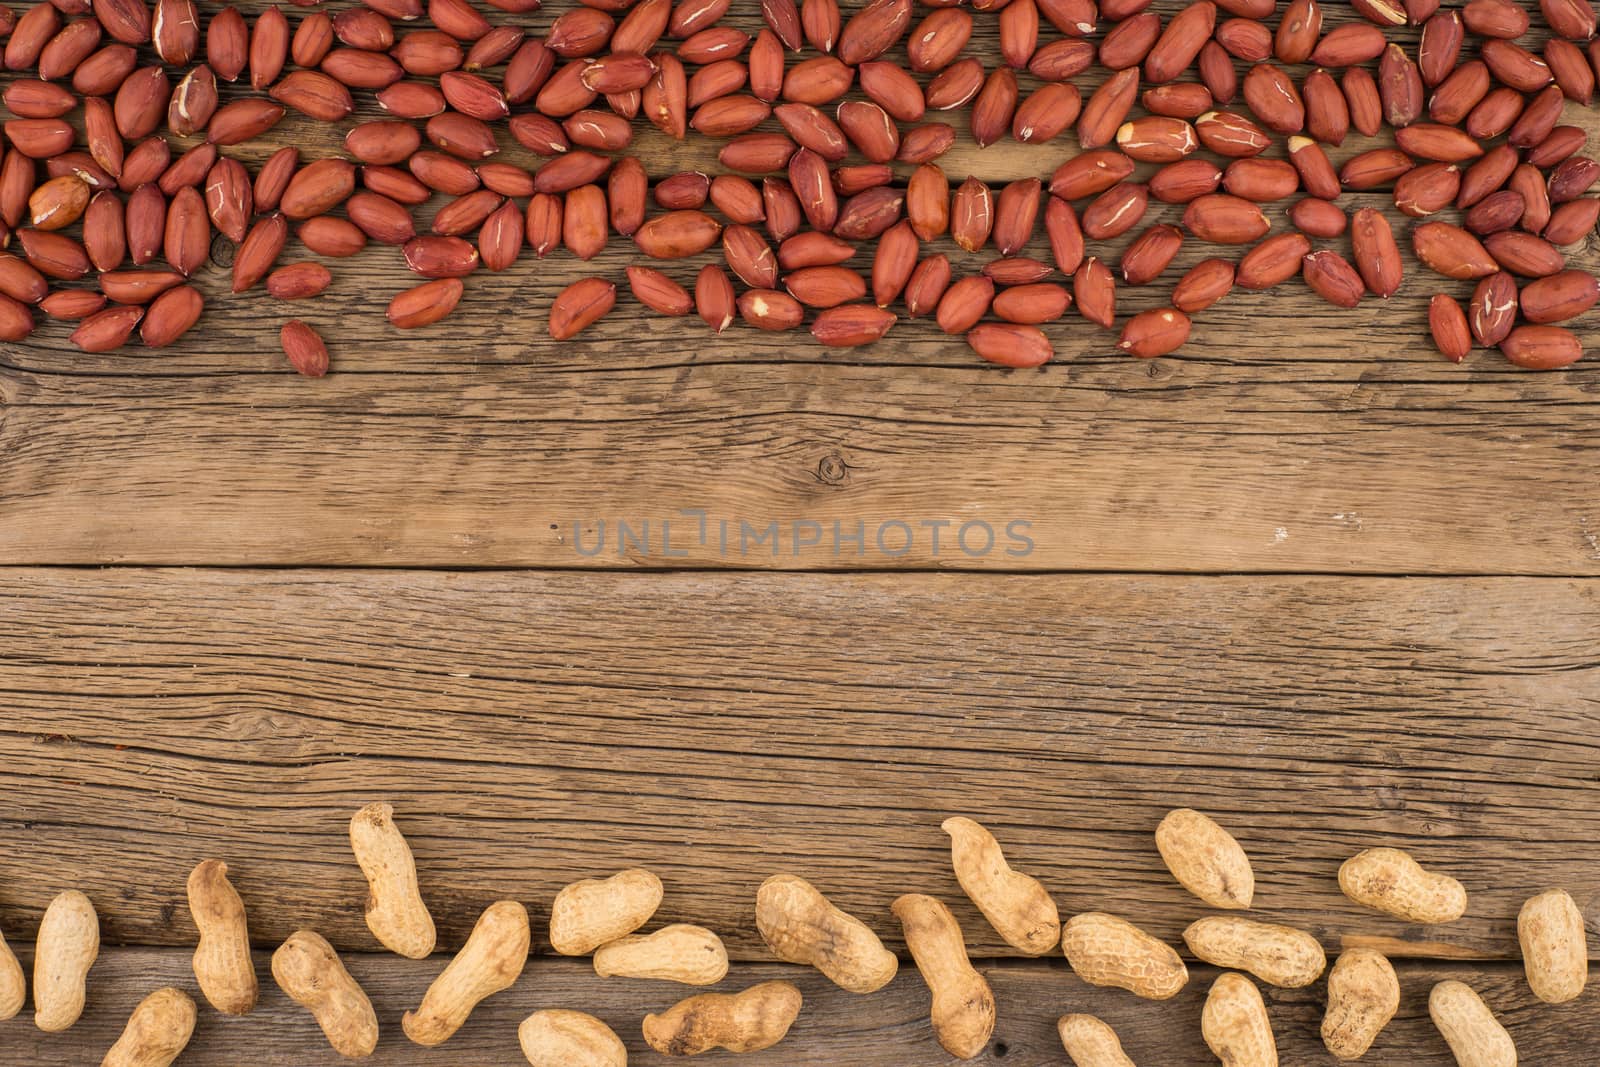 Peanuts on the background of the old wooden table. Top view.